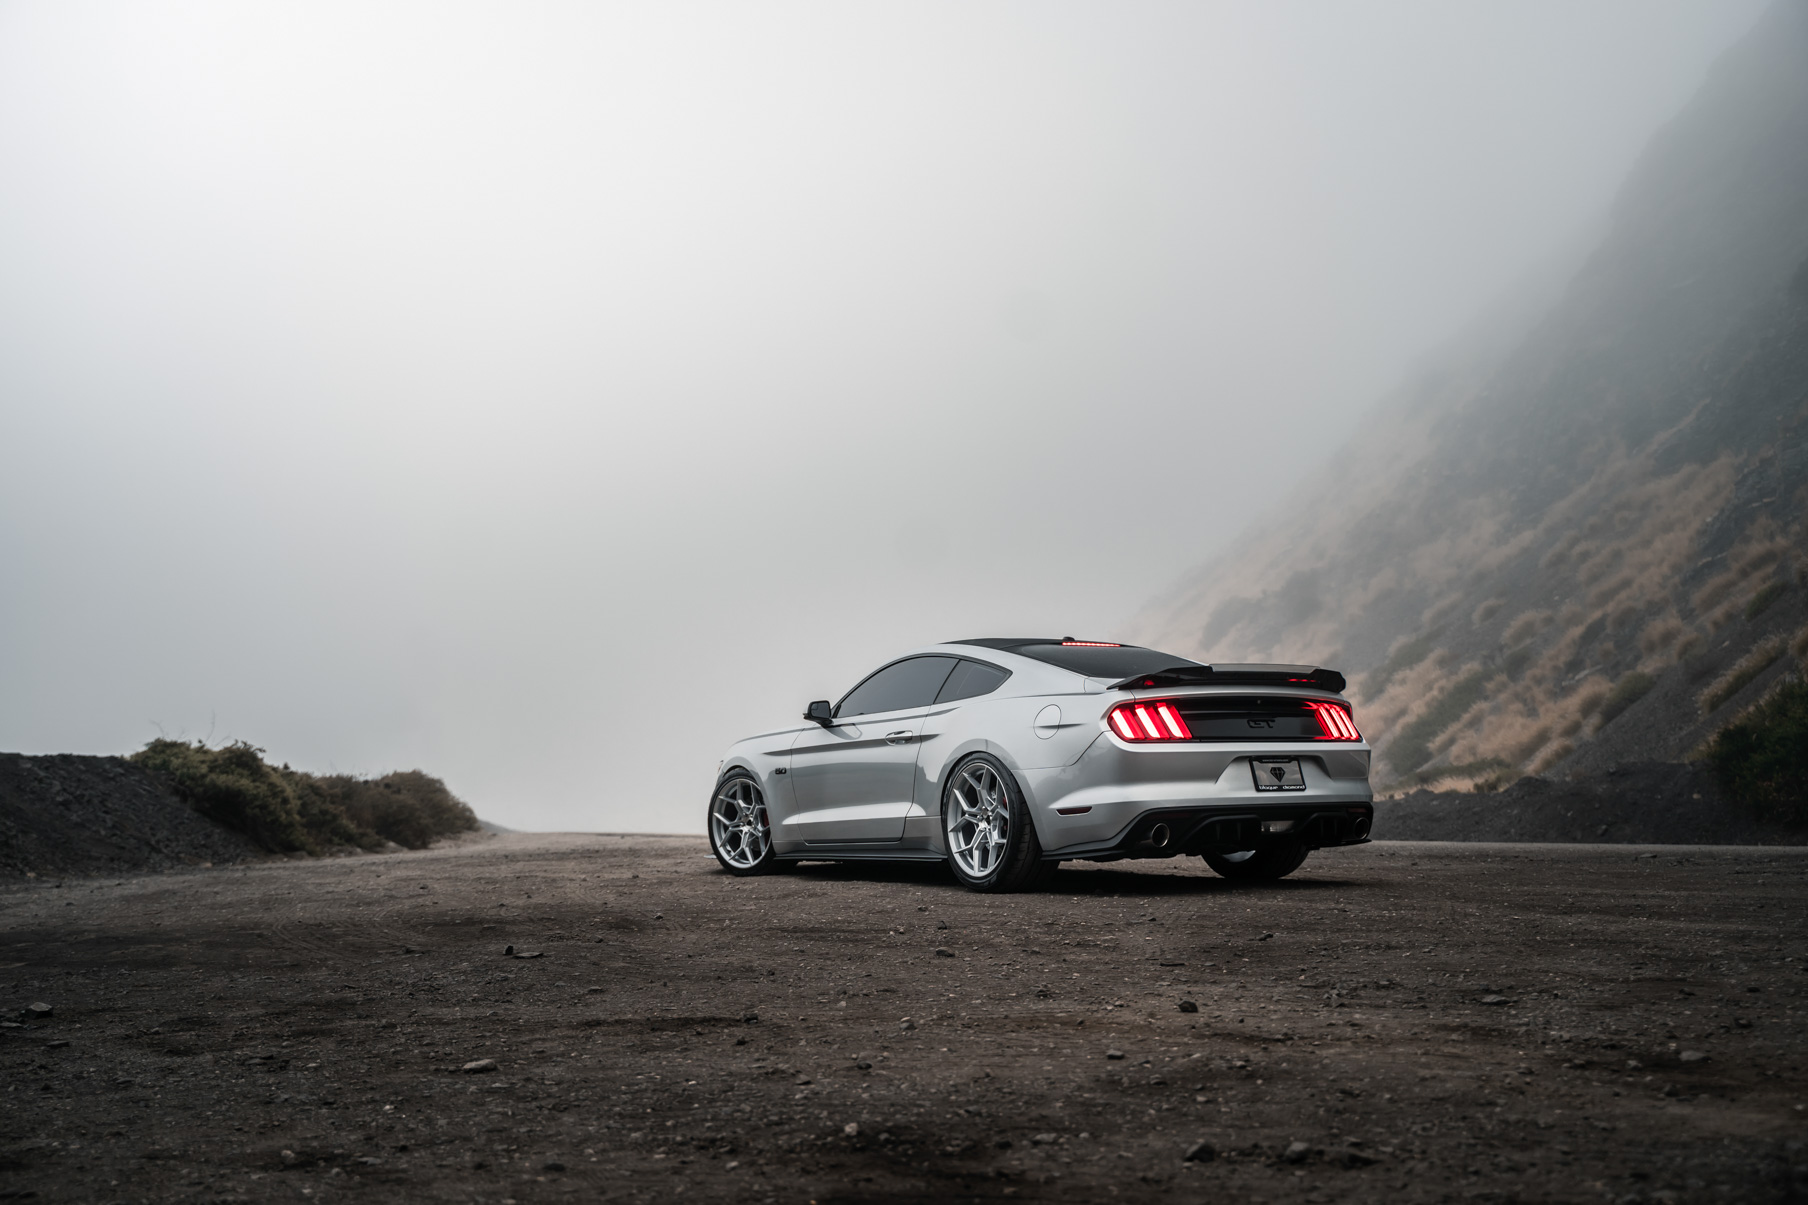 S650 Mustang Authorized Blaque Diamond Wheels Dealer: BD-F12 F18 F25 F29 Flow Forged Series wheels for Mustang S650 2016_Mustang_GT_Blaque_Diamond_wheels_BDF25_20_inch_Brushed_Silver-5